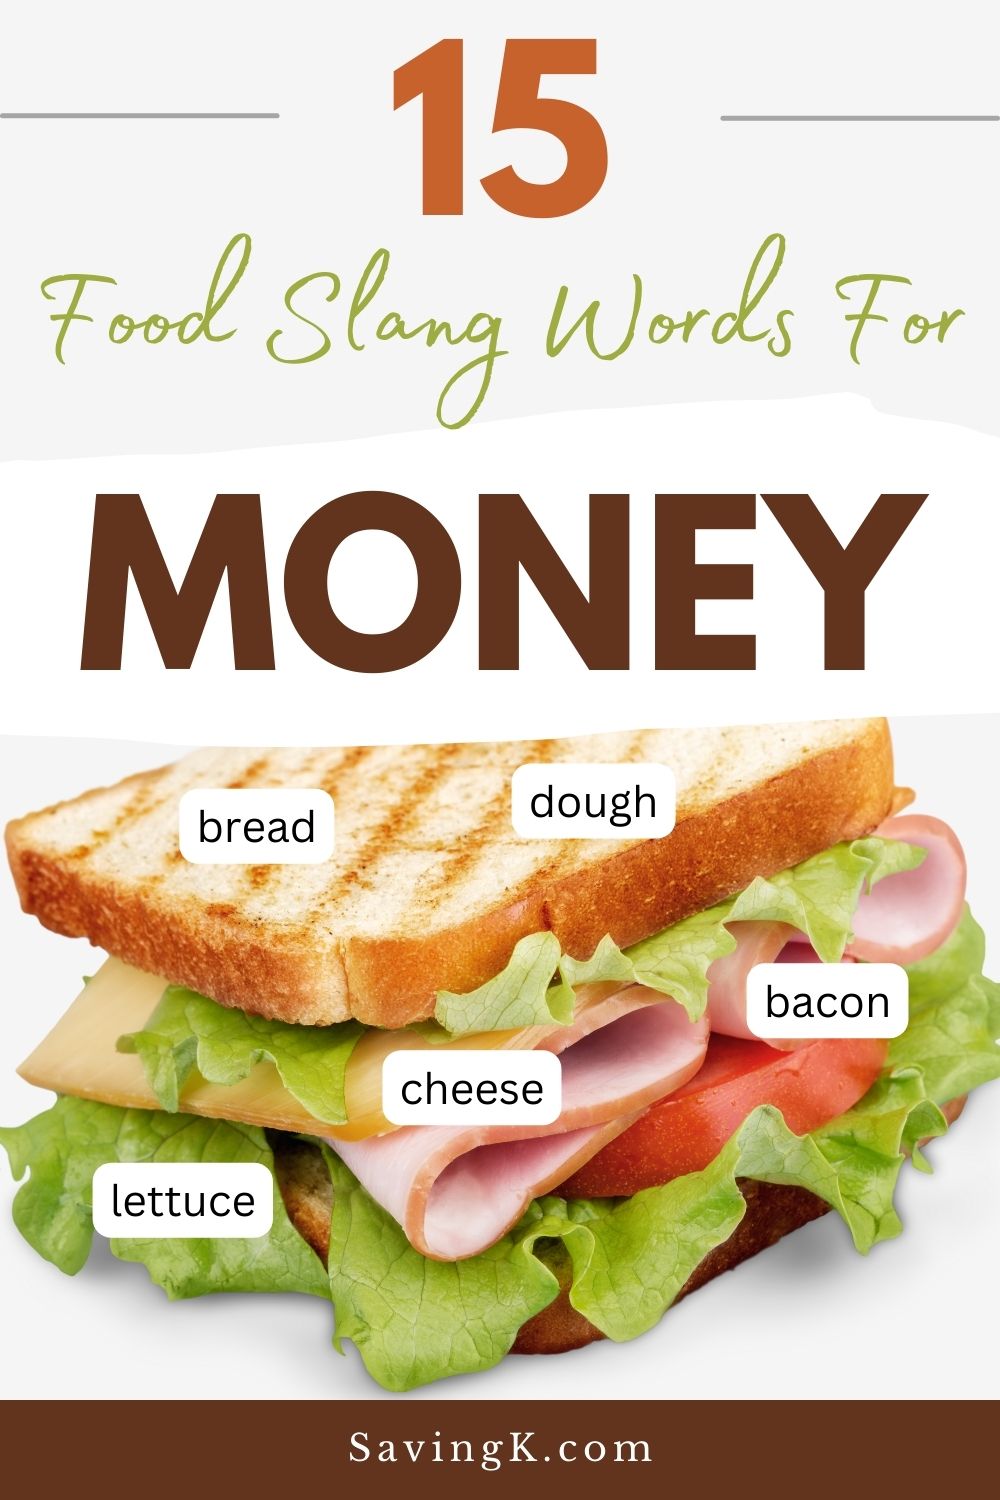 Feast on finance: 15 food slang words for money illustrated by a stacked sandwich.